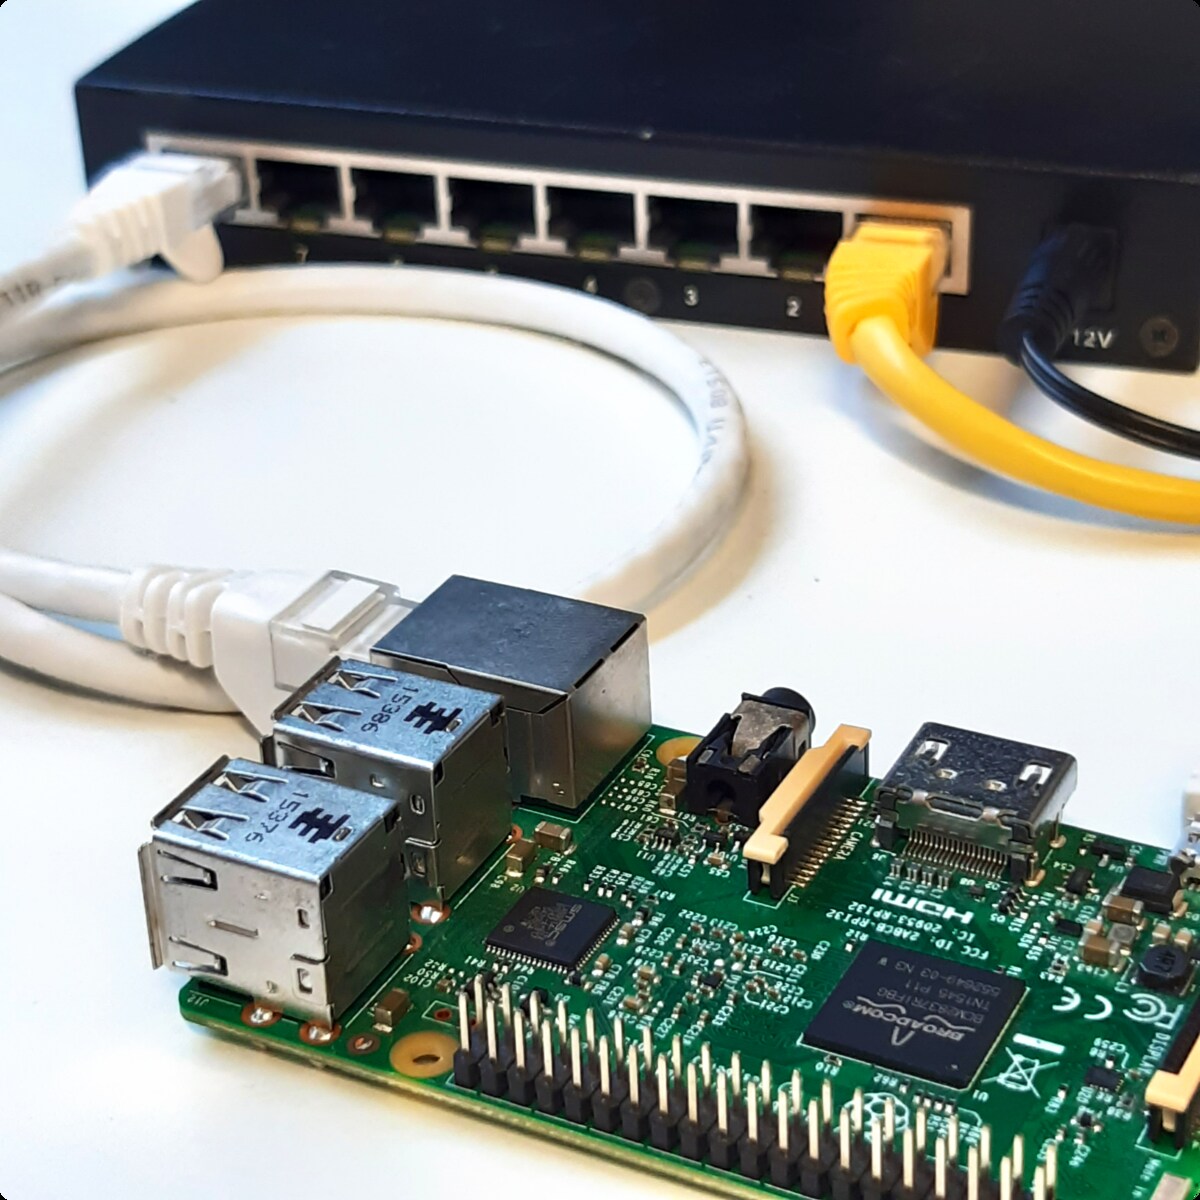 How To Make A Network Switch With A Raspberry Pi